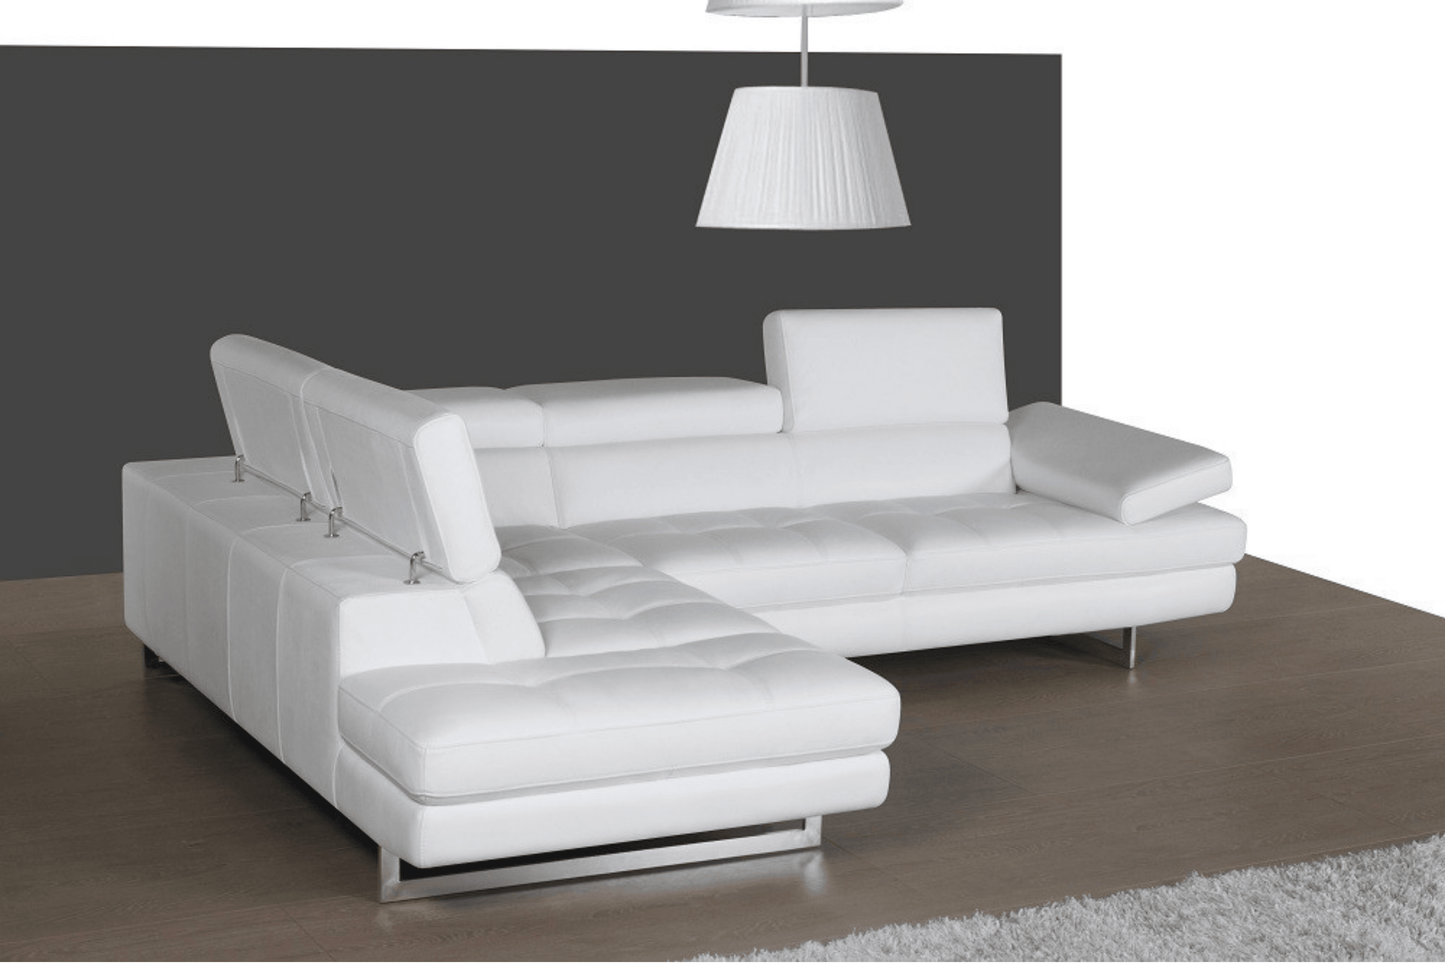 A761 Italian Leather Sectional in Snow White - Venini Furniture 